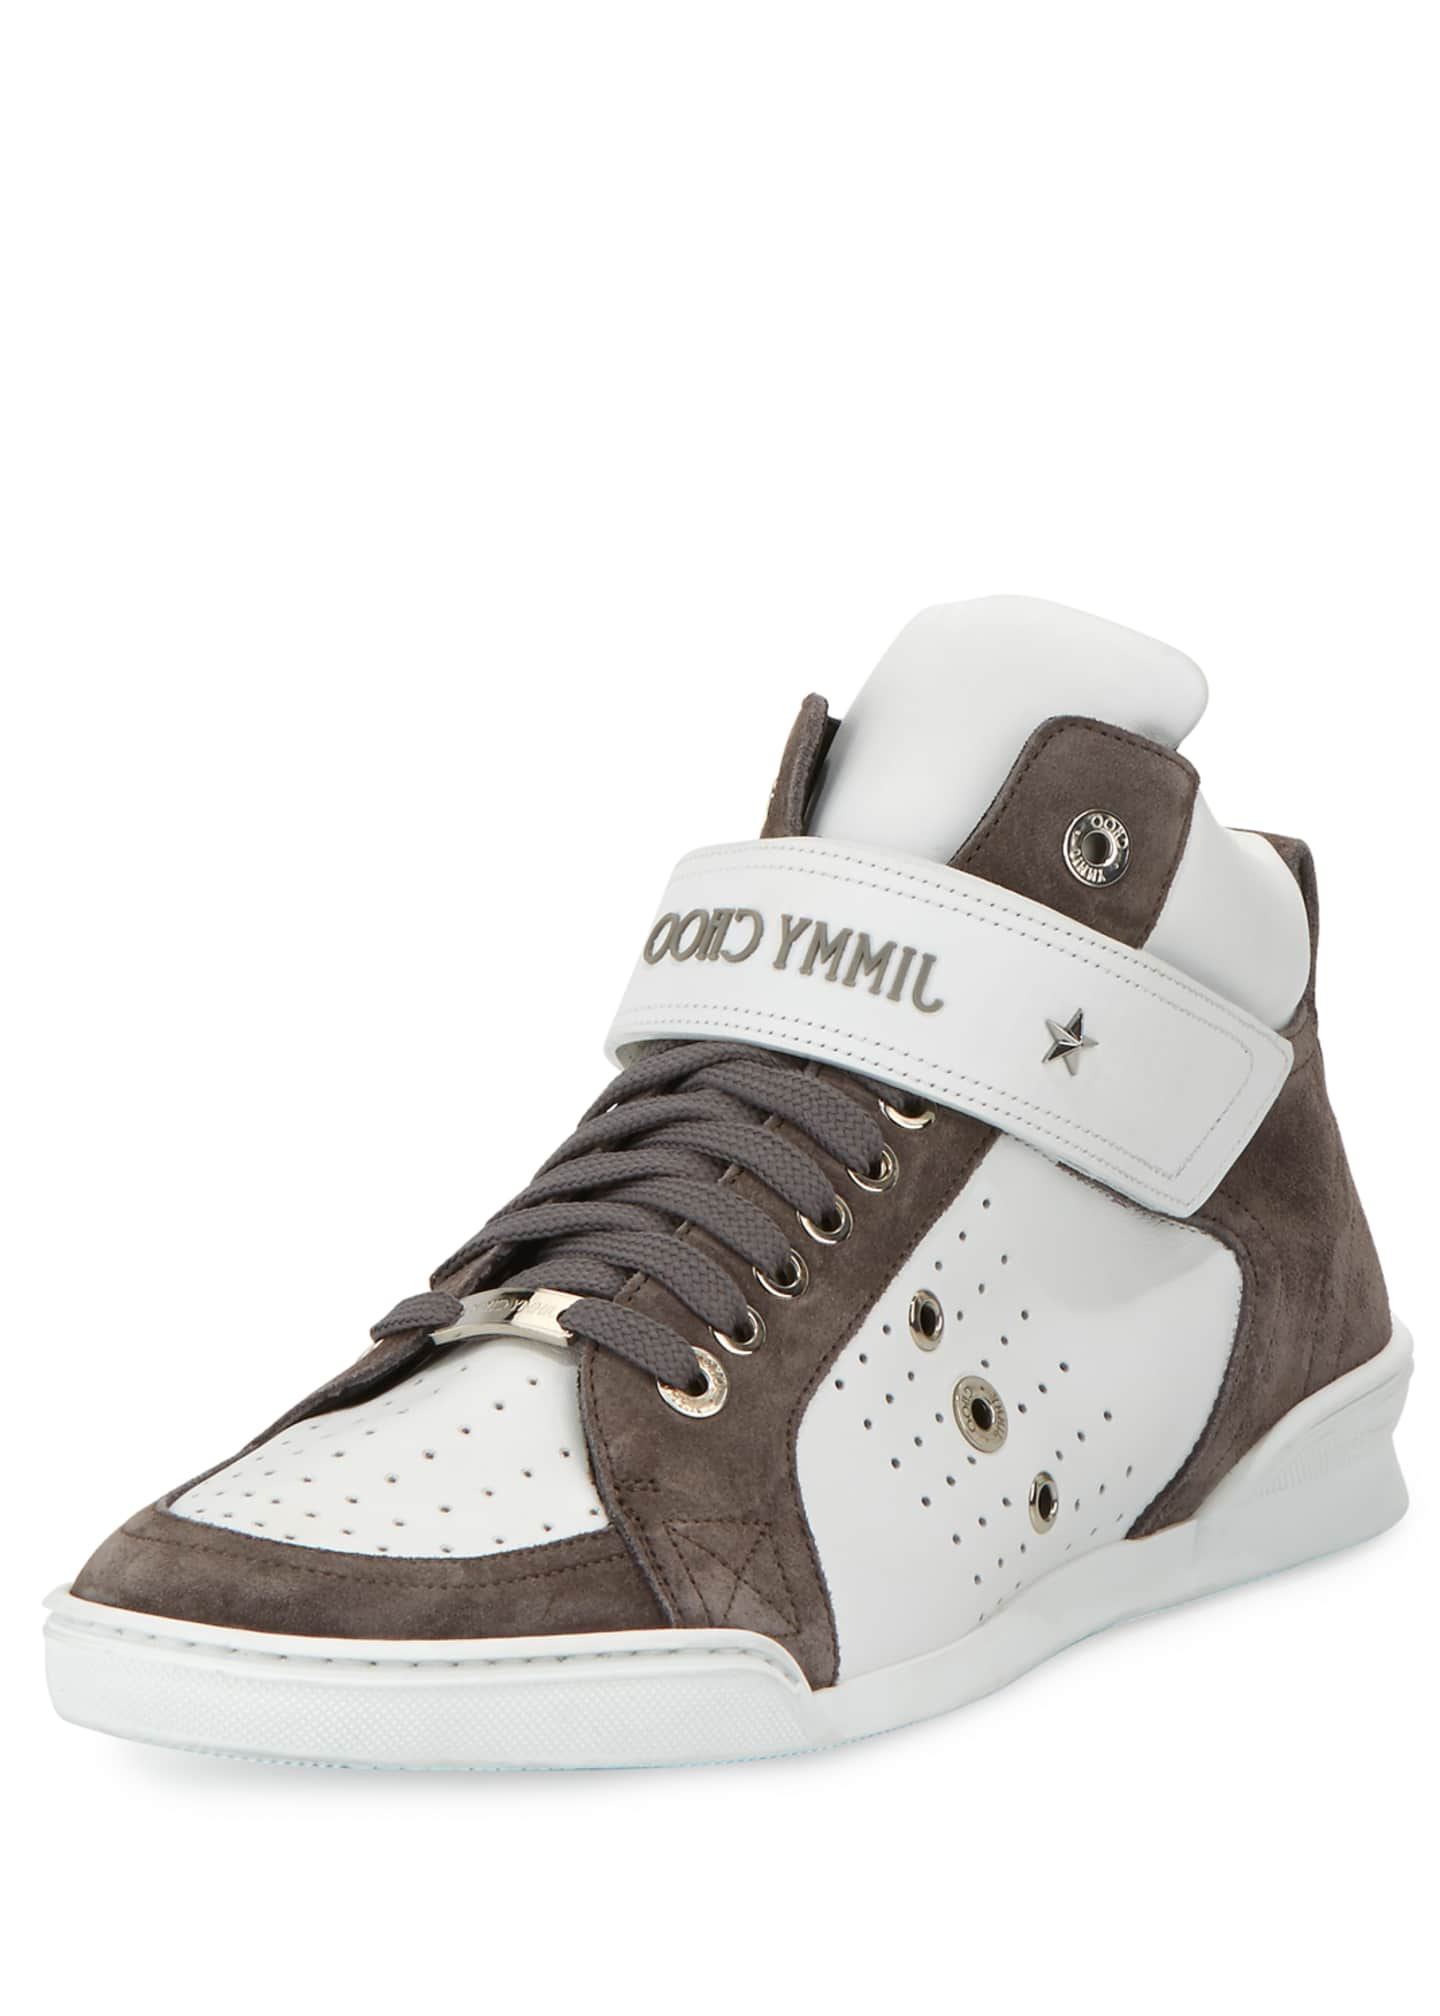 mens leather high top sneakers